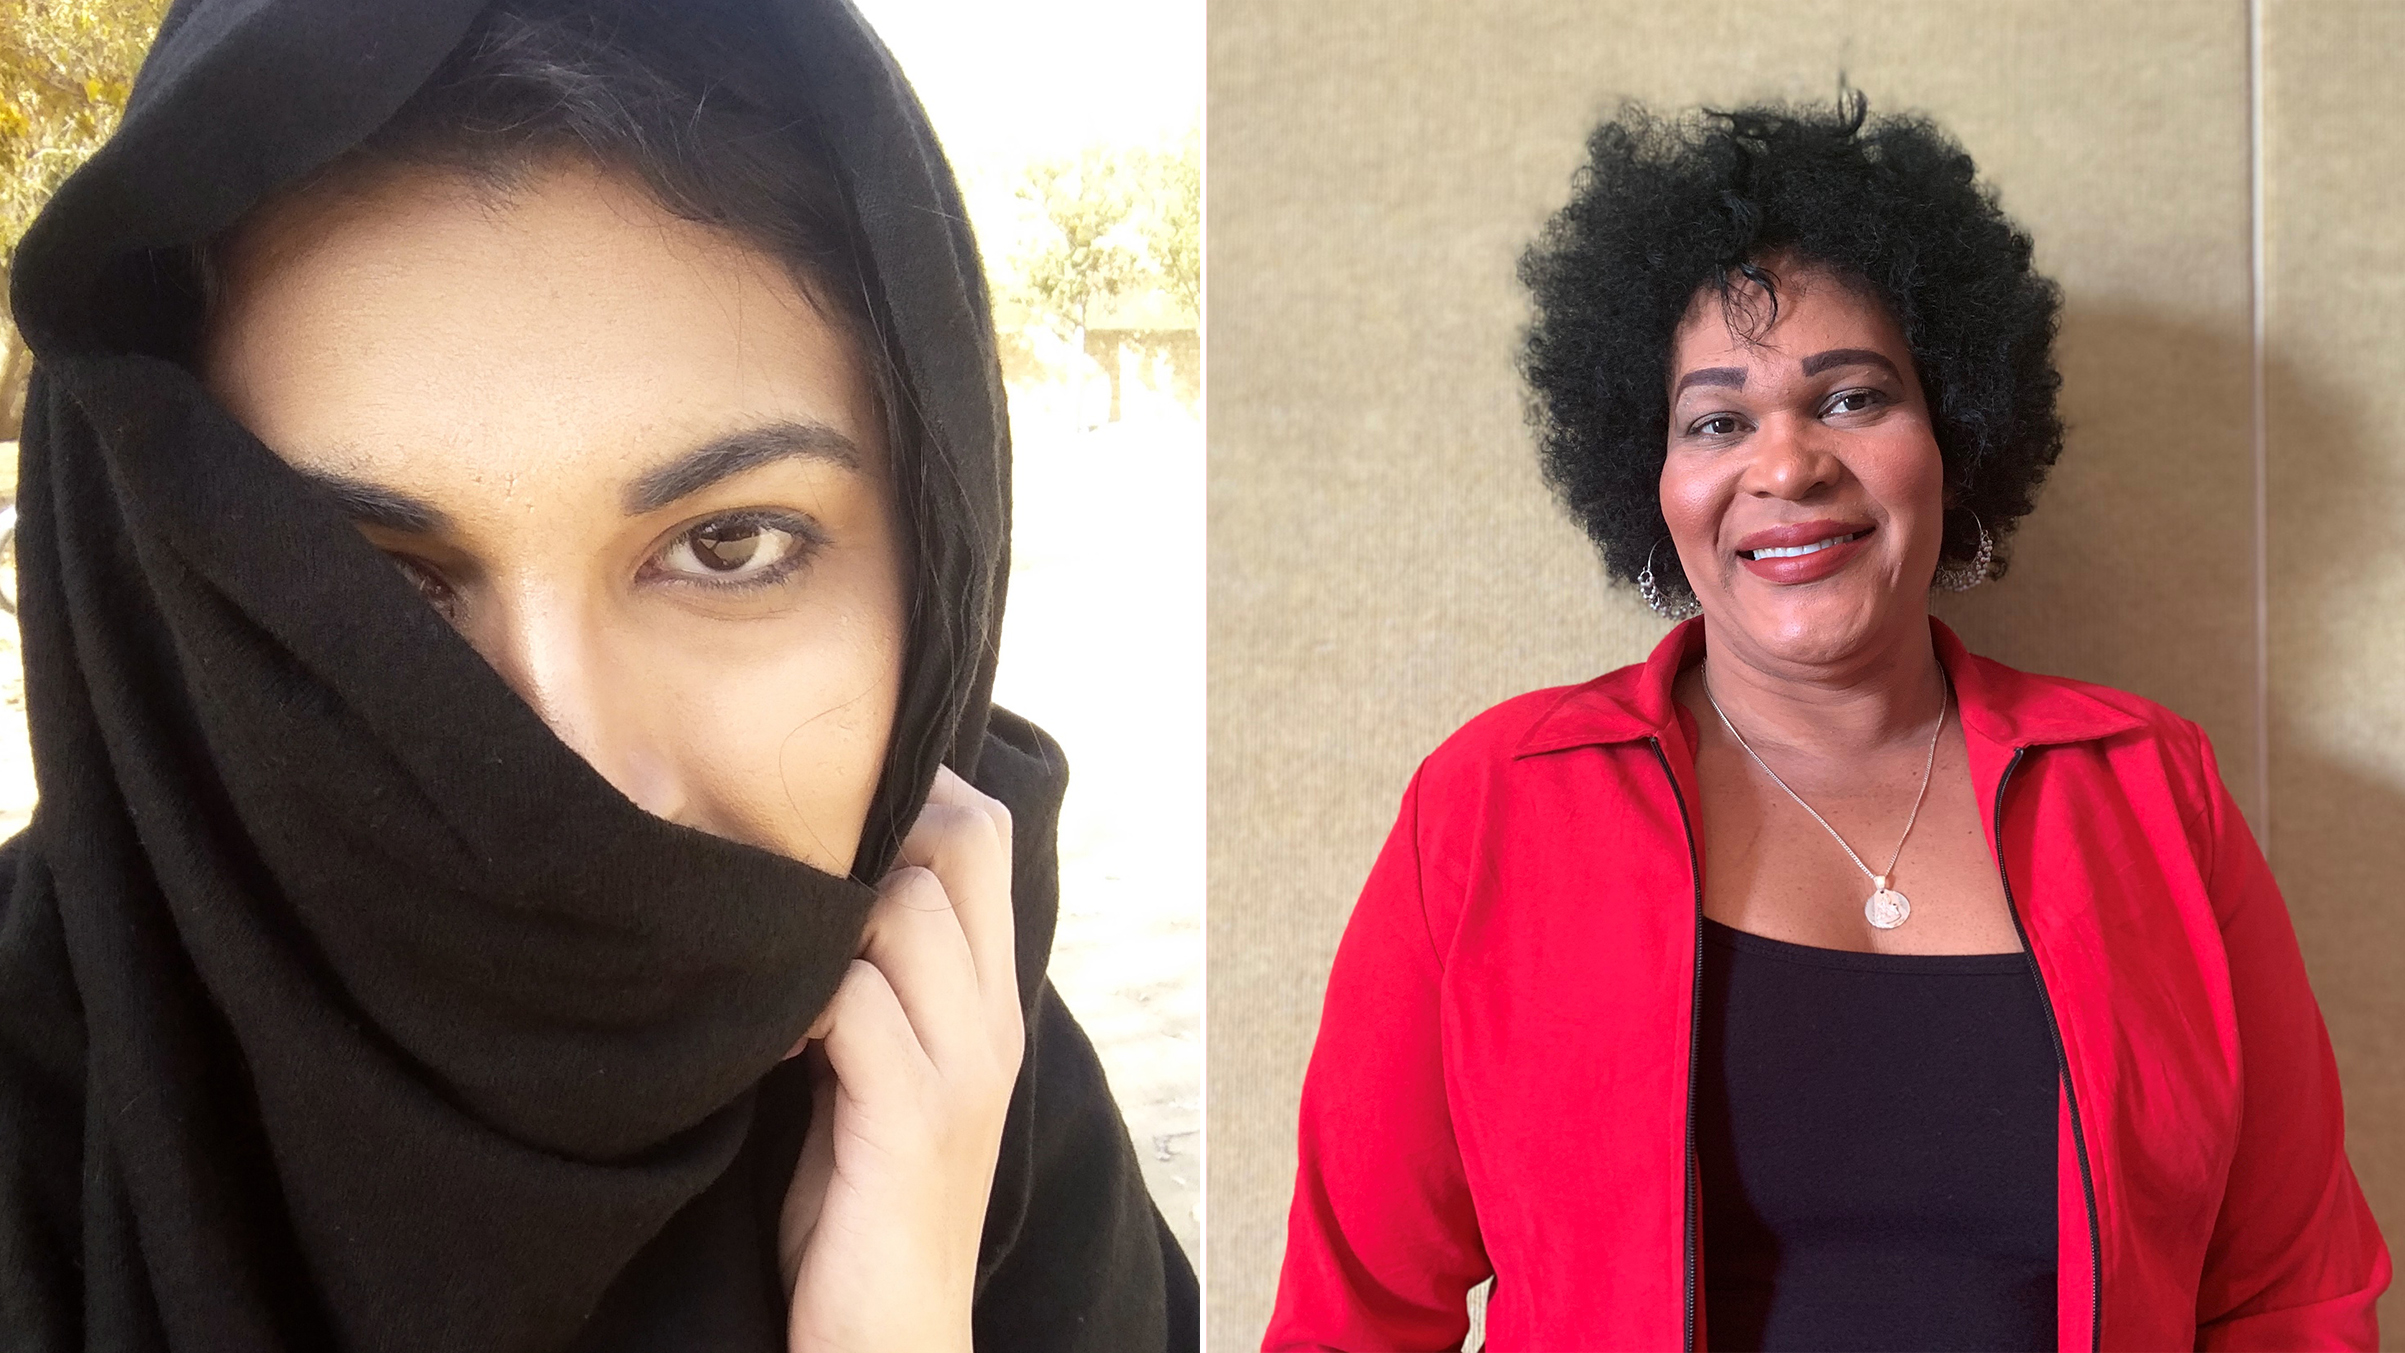 To mark International Transgender Day of Visibility, Amnesty International asked two activists, Mehlab Jameel from Pakistan, and Nairovi Castillo from the Dominican Republic, to share their stories (Mehlab Jameel; Nairovi Castillo—Amnesty International)